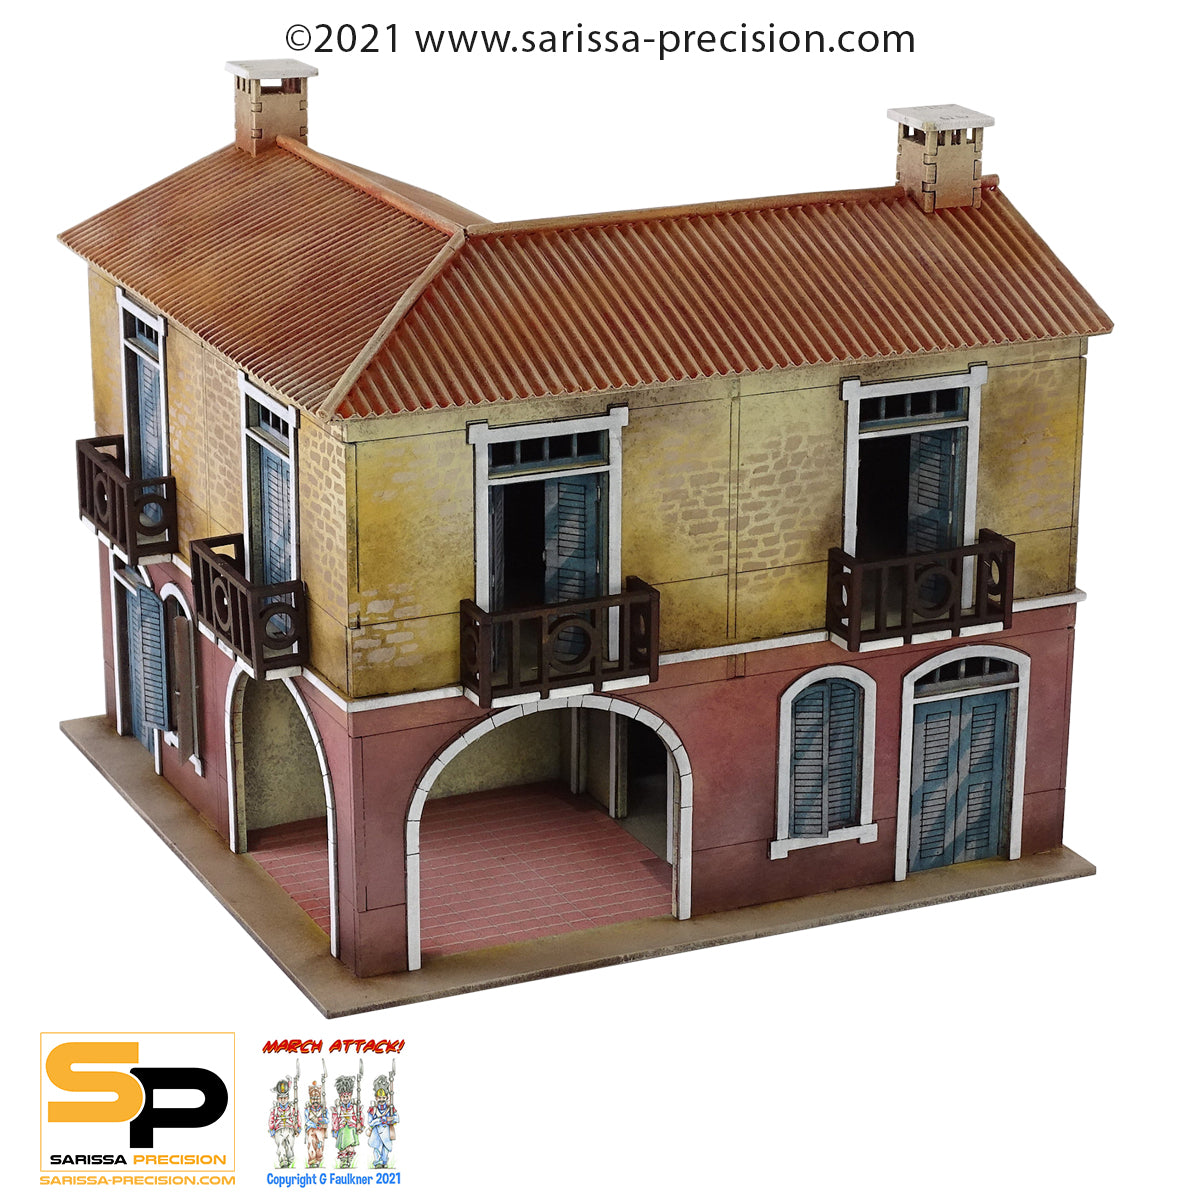 Mediterranean Corner Tavern - 2 Floors with Balcony and Pitched Roof